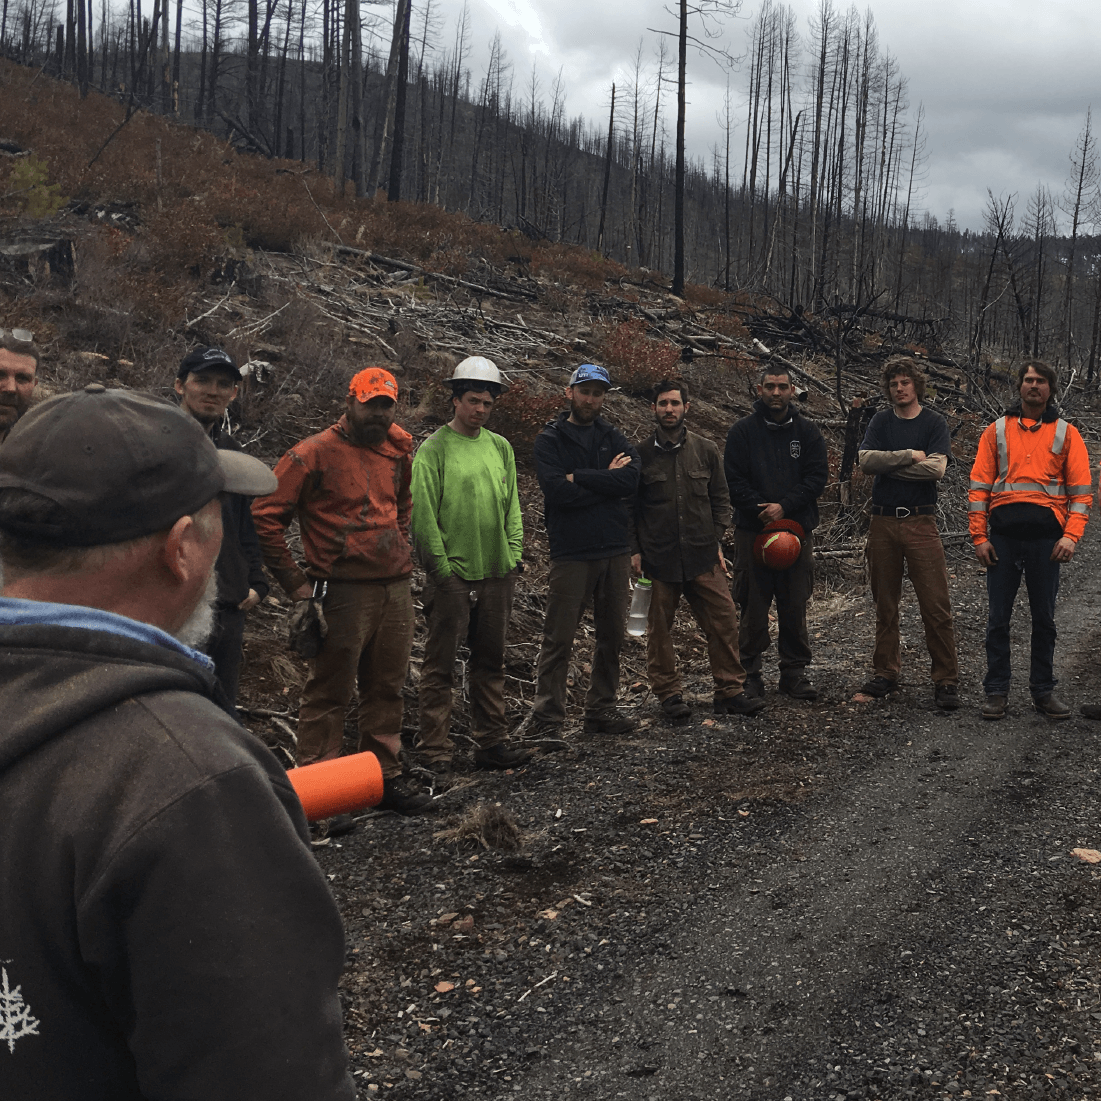 Group gathers for discussion during the advanced tree-cutting workshop.